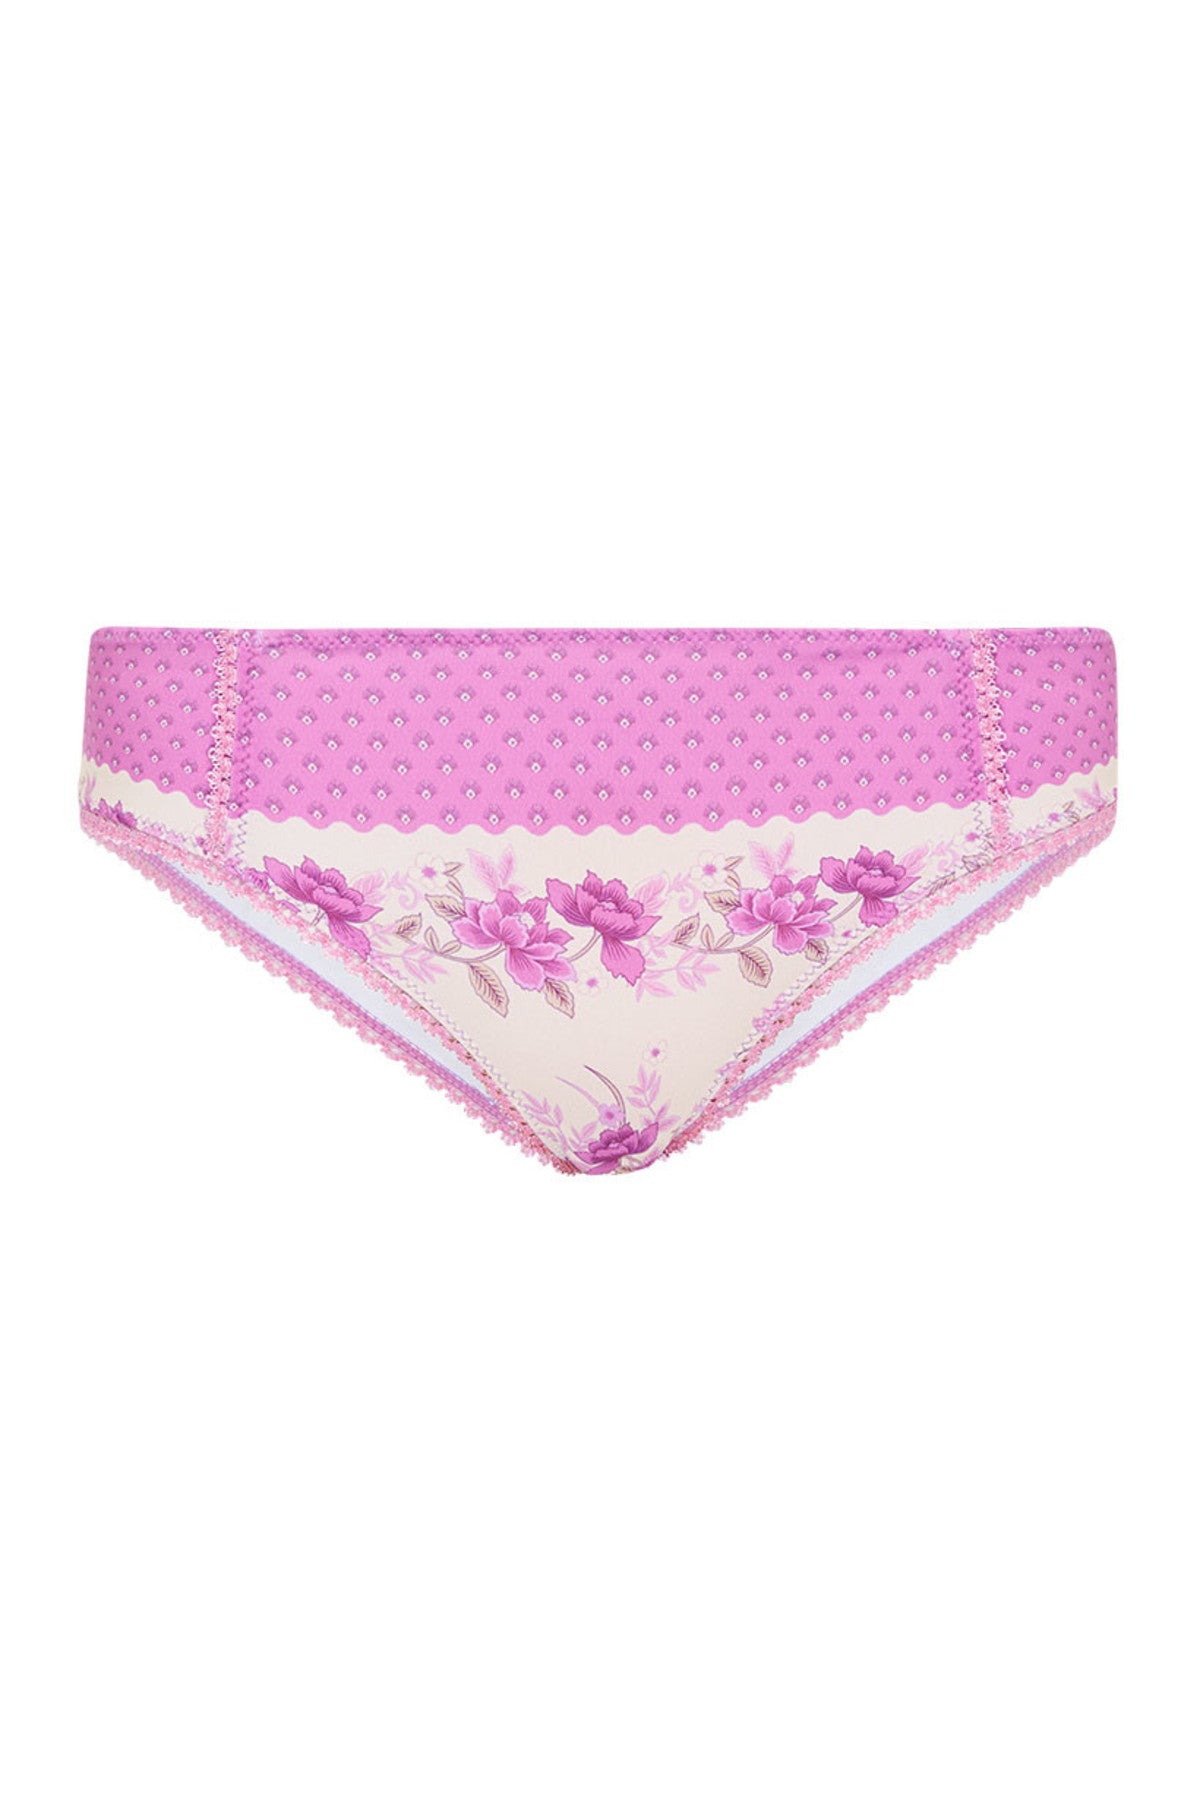 Coco Lei Bloomers